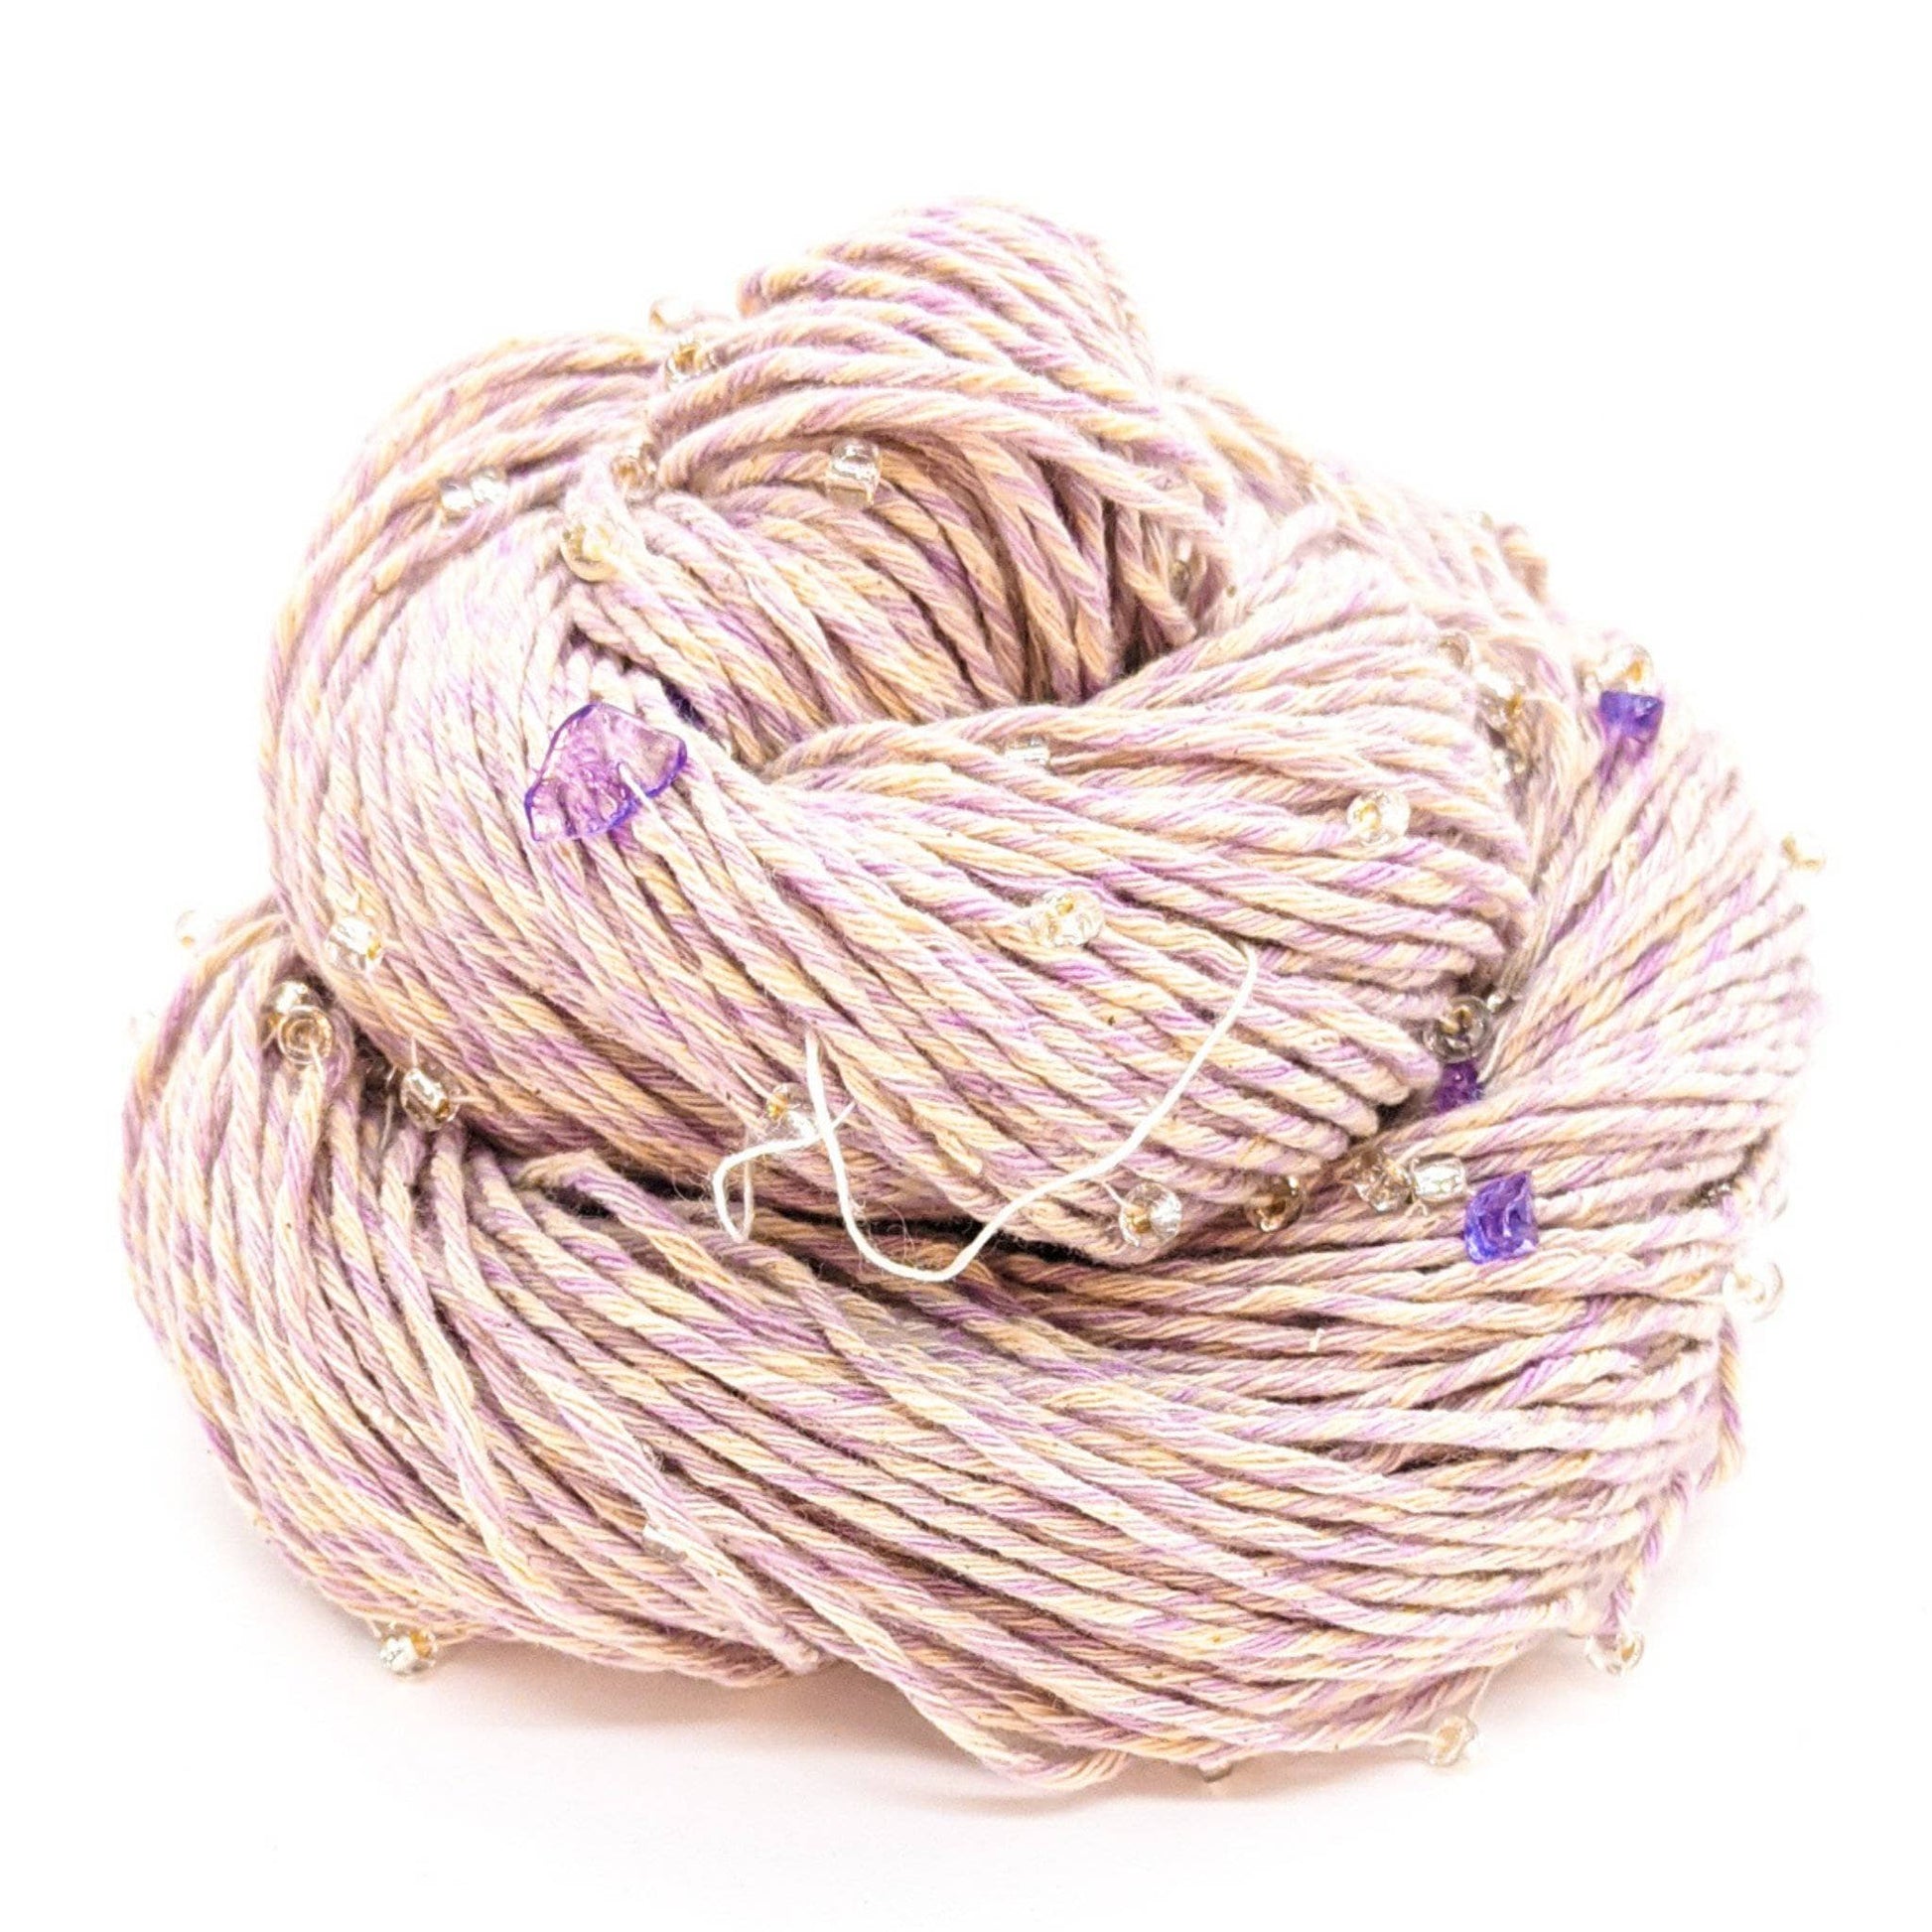 Light purple and white yarn with light purple beads and crystals throughout.